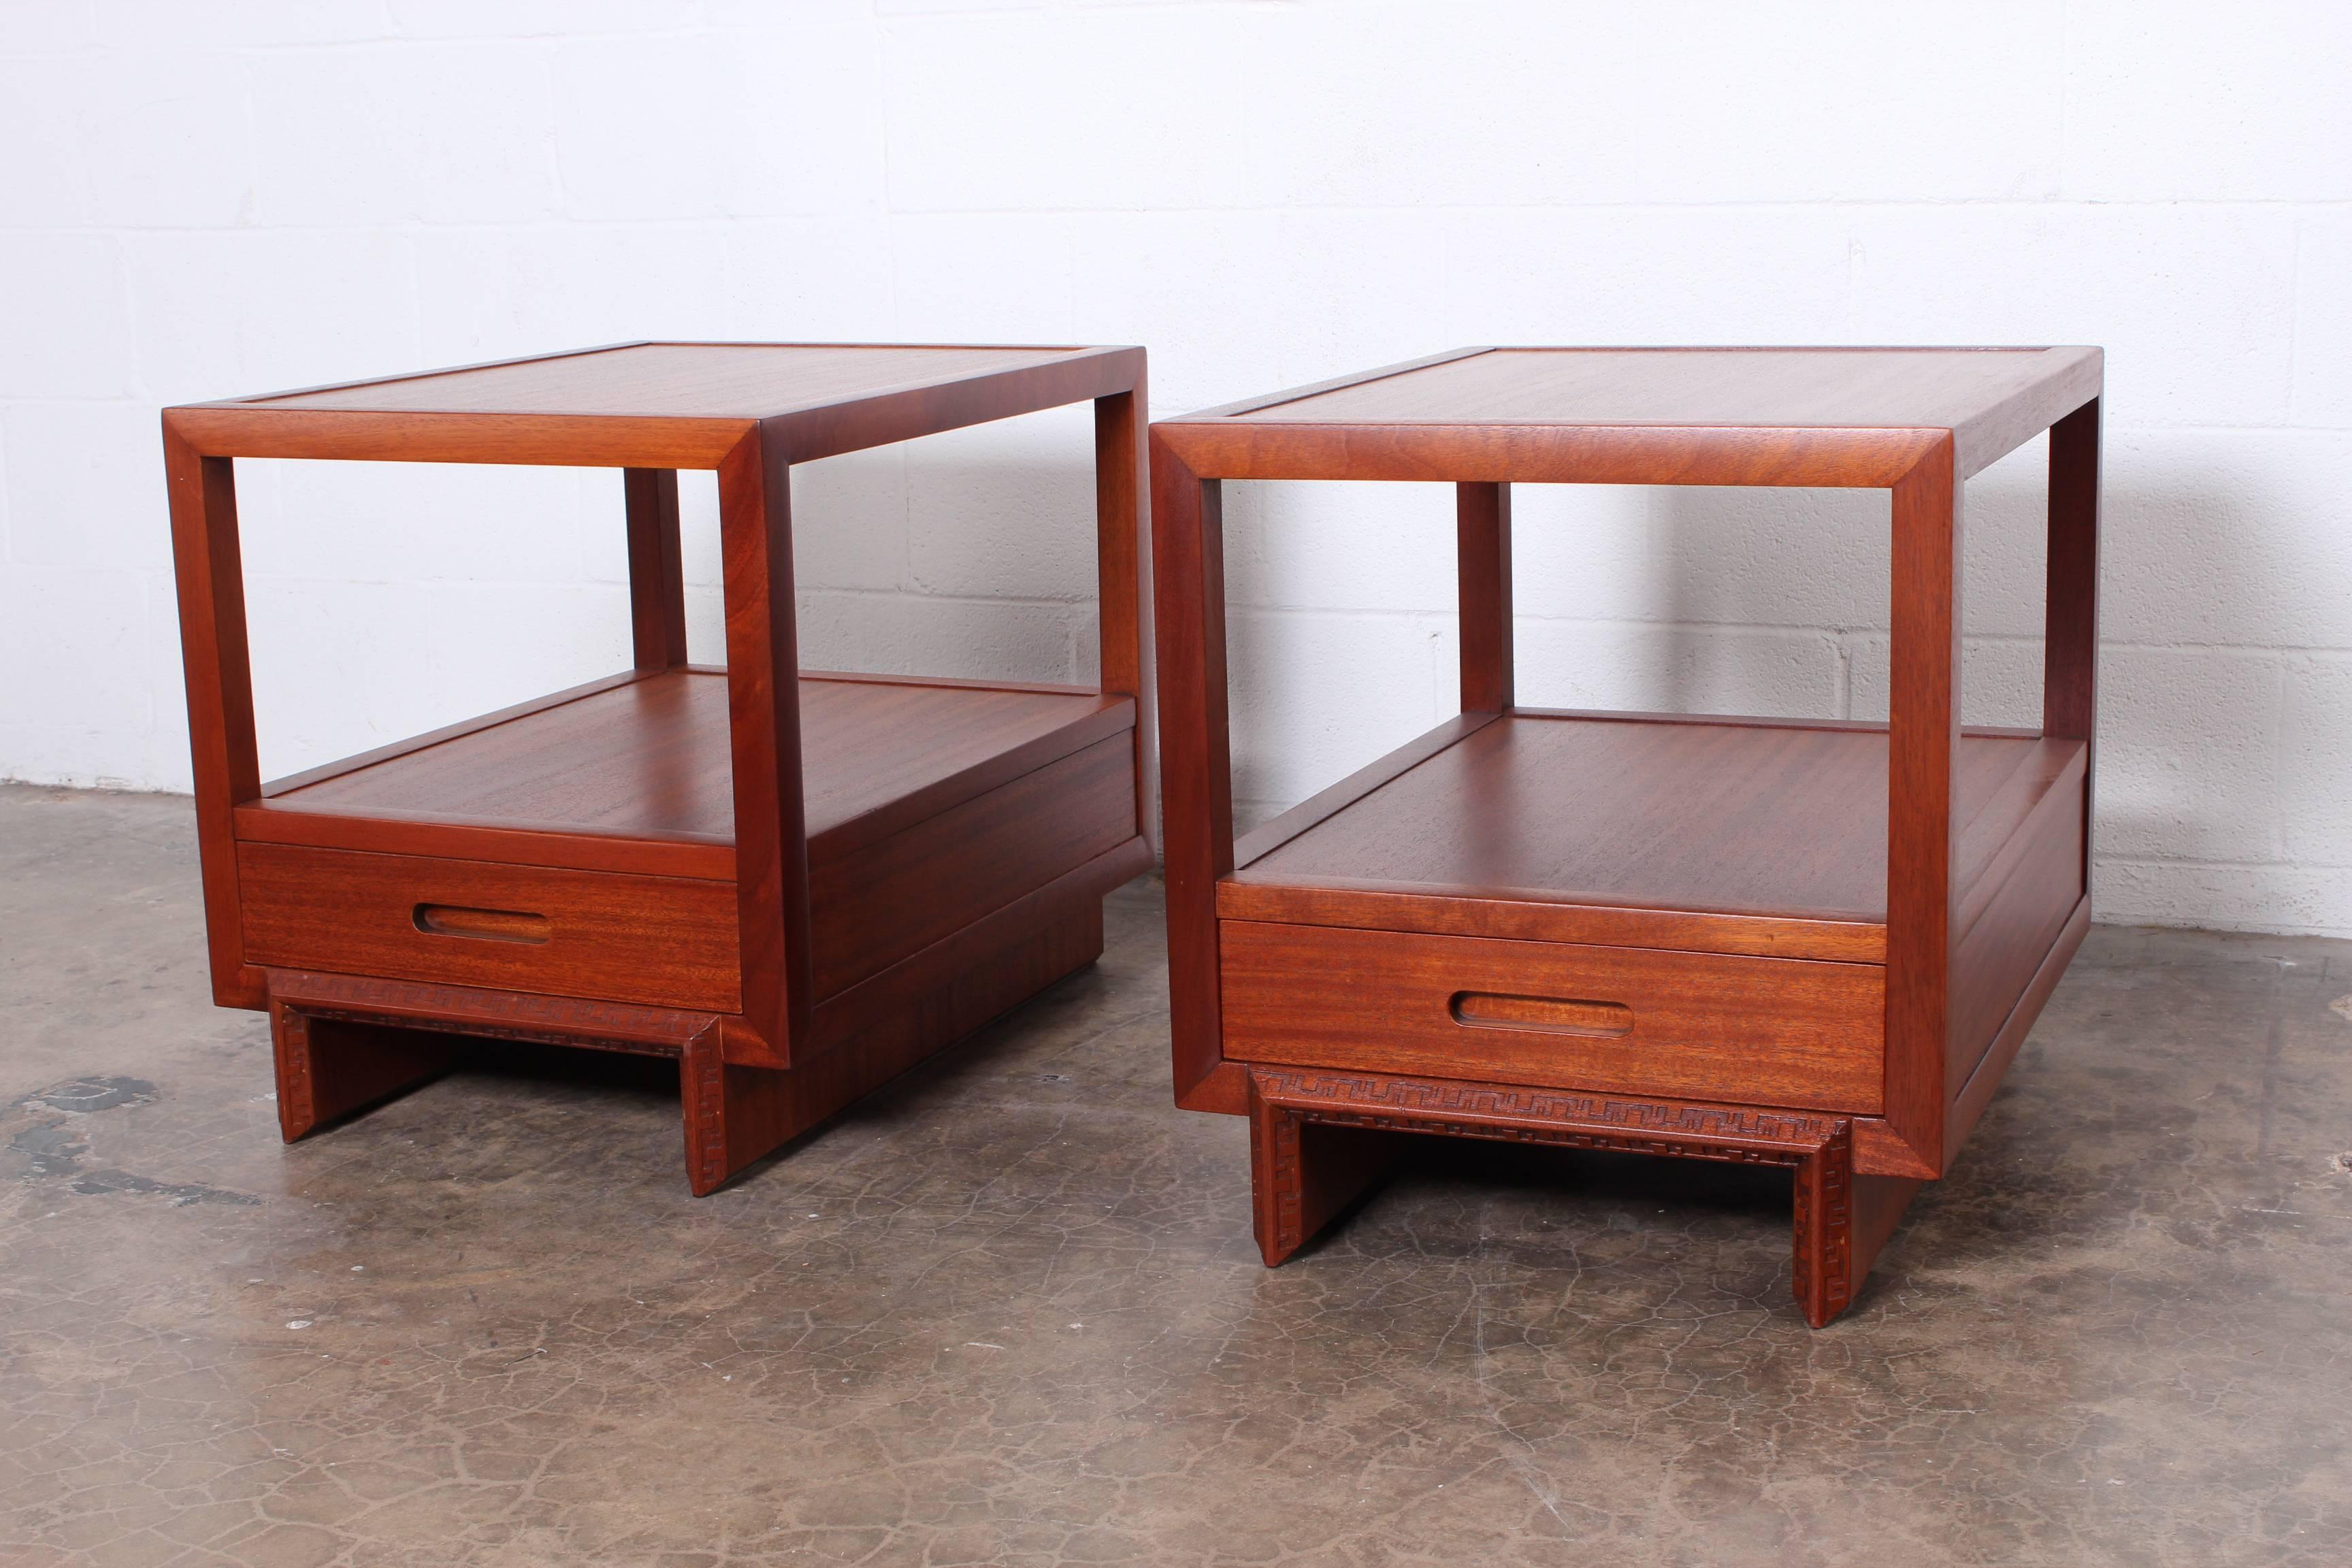 A pair of mahogany nightstands or end tables designed by Frank Lloyd Wright for Heritage Henredon.